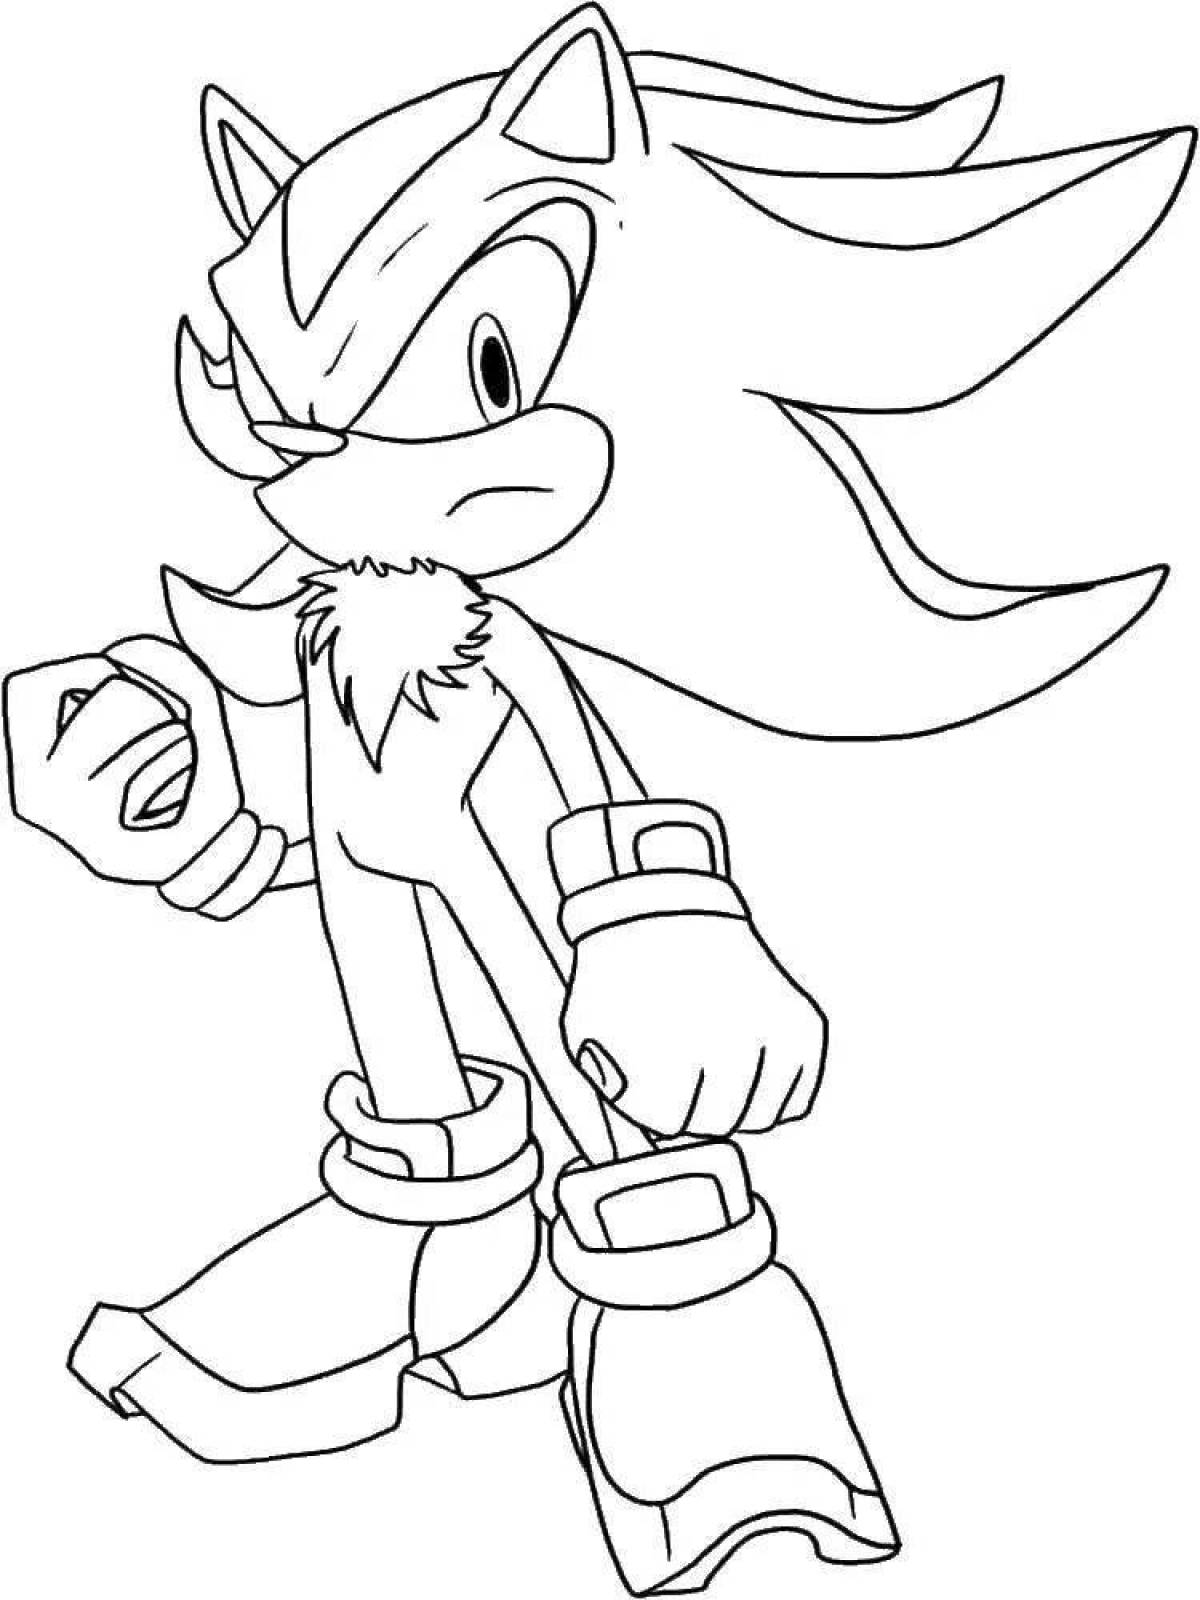 Glittering shadow hedgehog coloring page